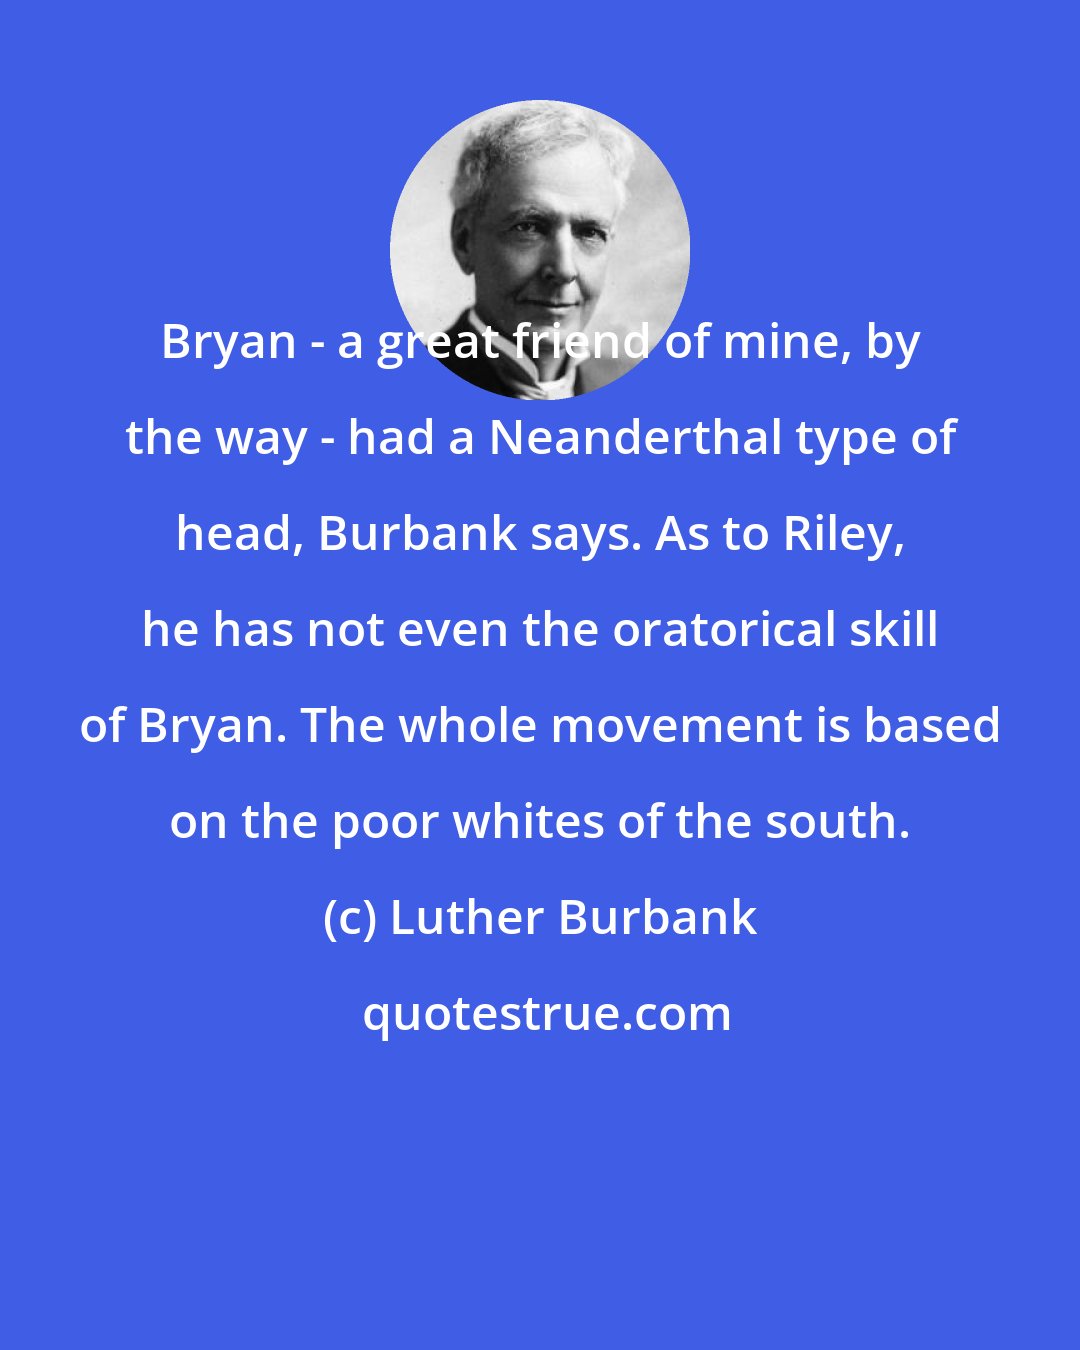 Luther Burbank: Bryan - a great friend of mine, by the way - had a Neanderthal type of head, Burbank says. As to Riley, he has not even the oratorical skill of Bryan. The whole movement is based on the poor whites of the south.